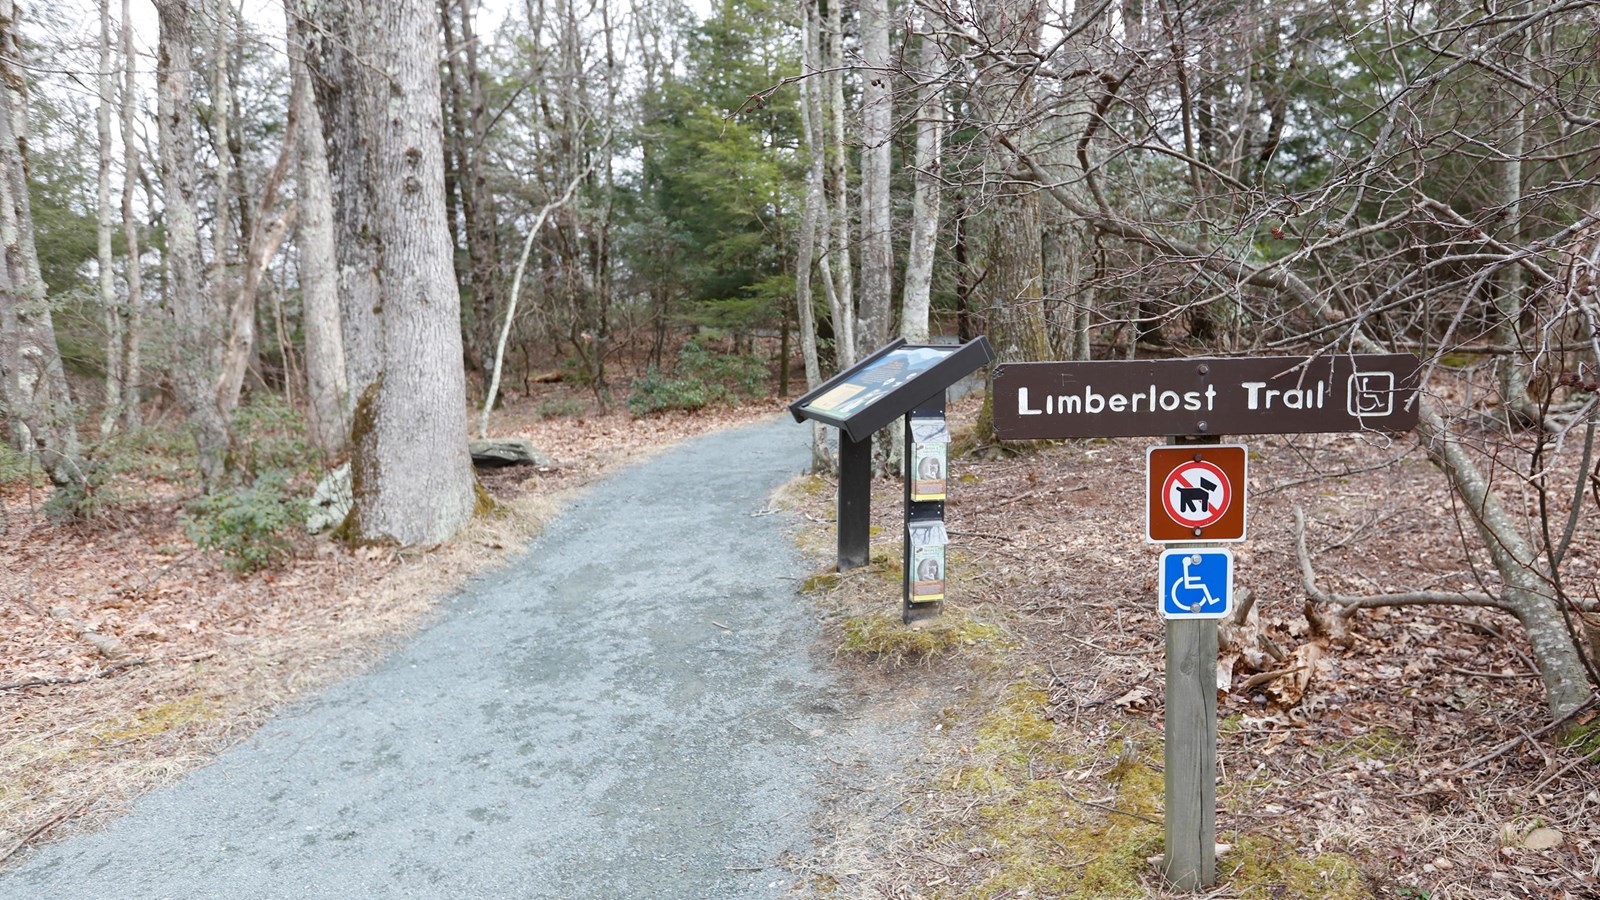 A crushed rock trail leads into the forest, past several educational signs 